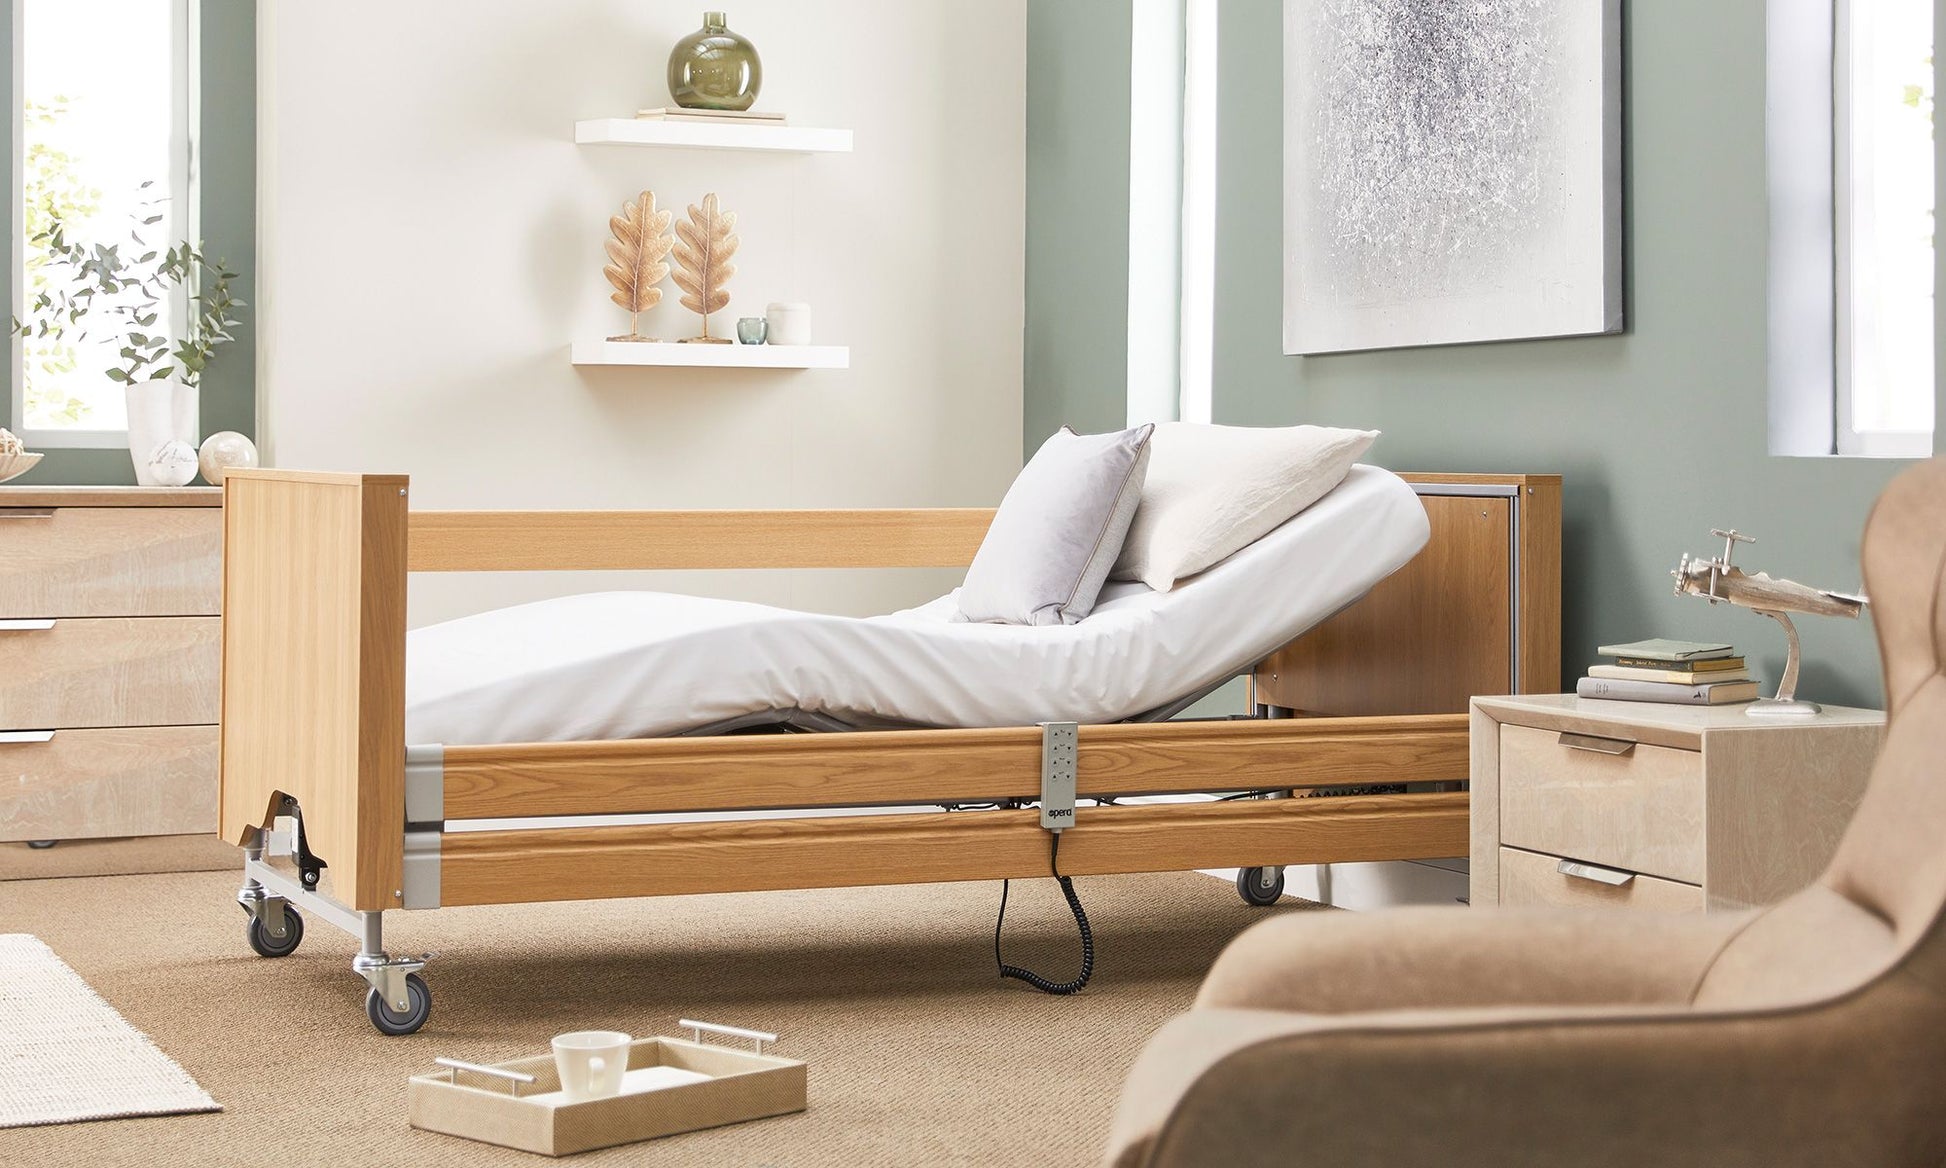 How to buy the best adjustable bed - Which?